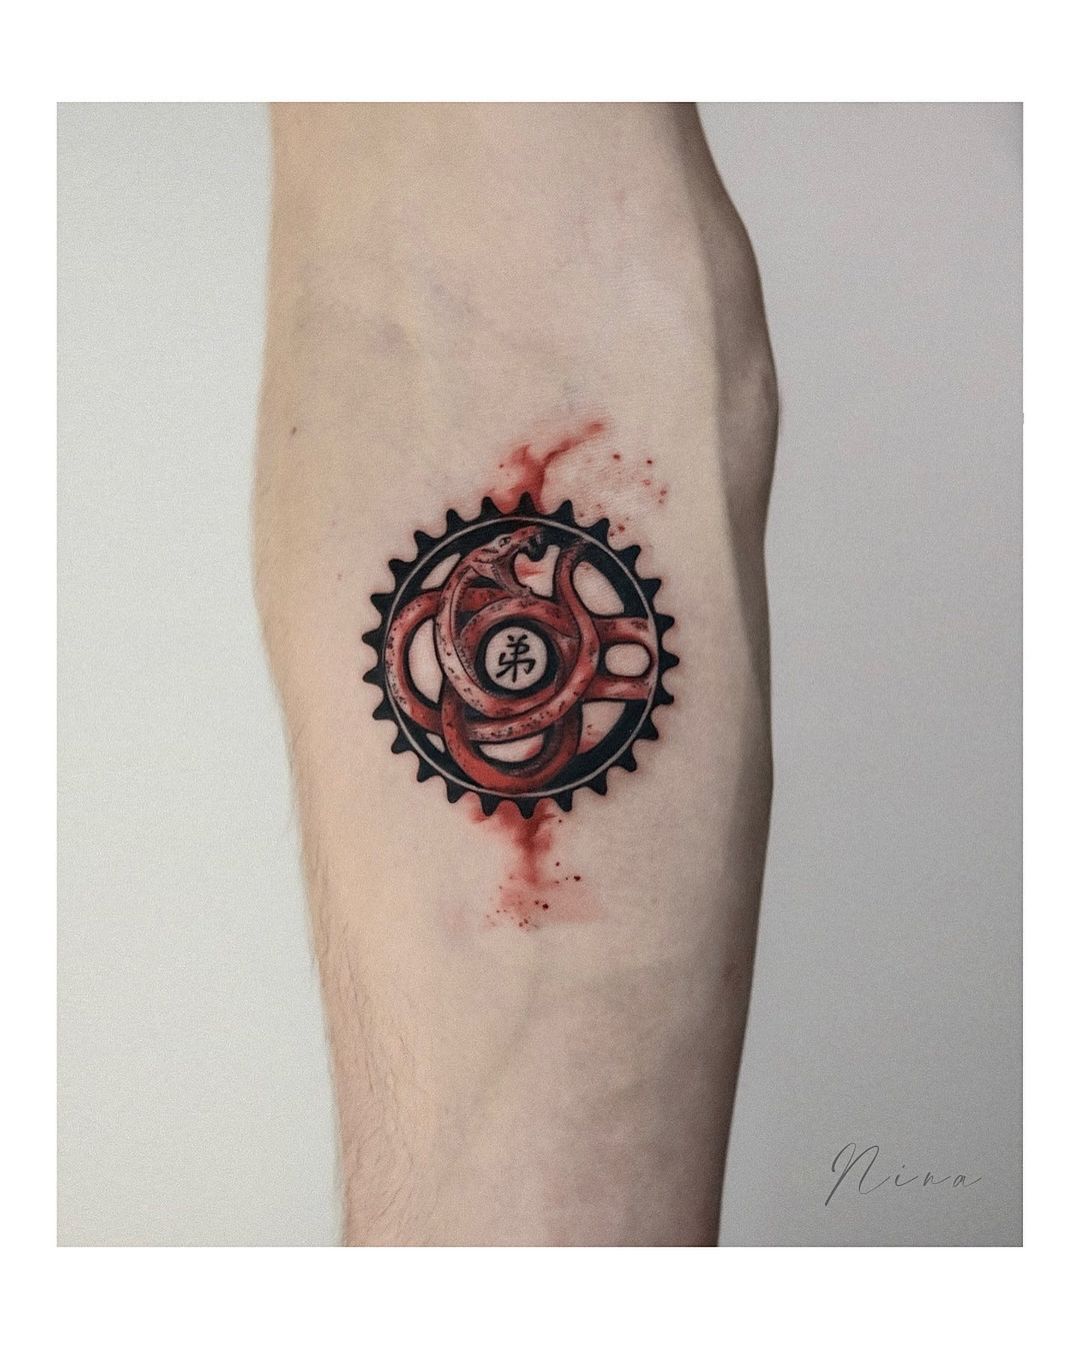 Designed my own tattoo based on my fixed gear bike. : r/FixedGearBicycle